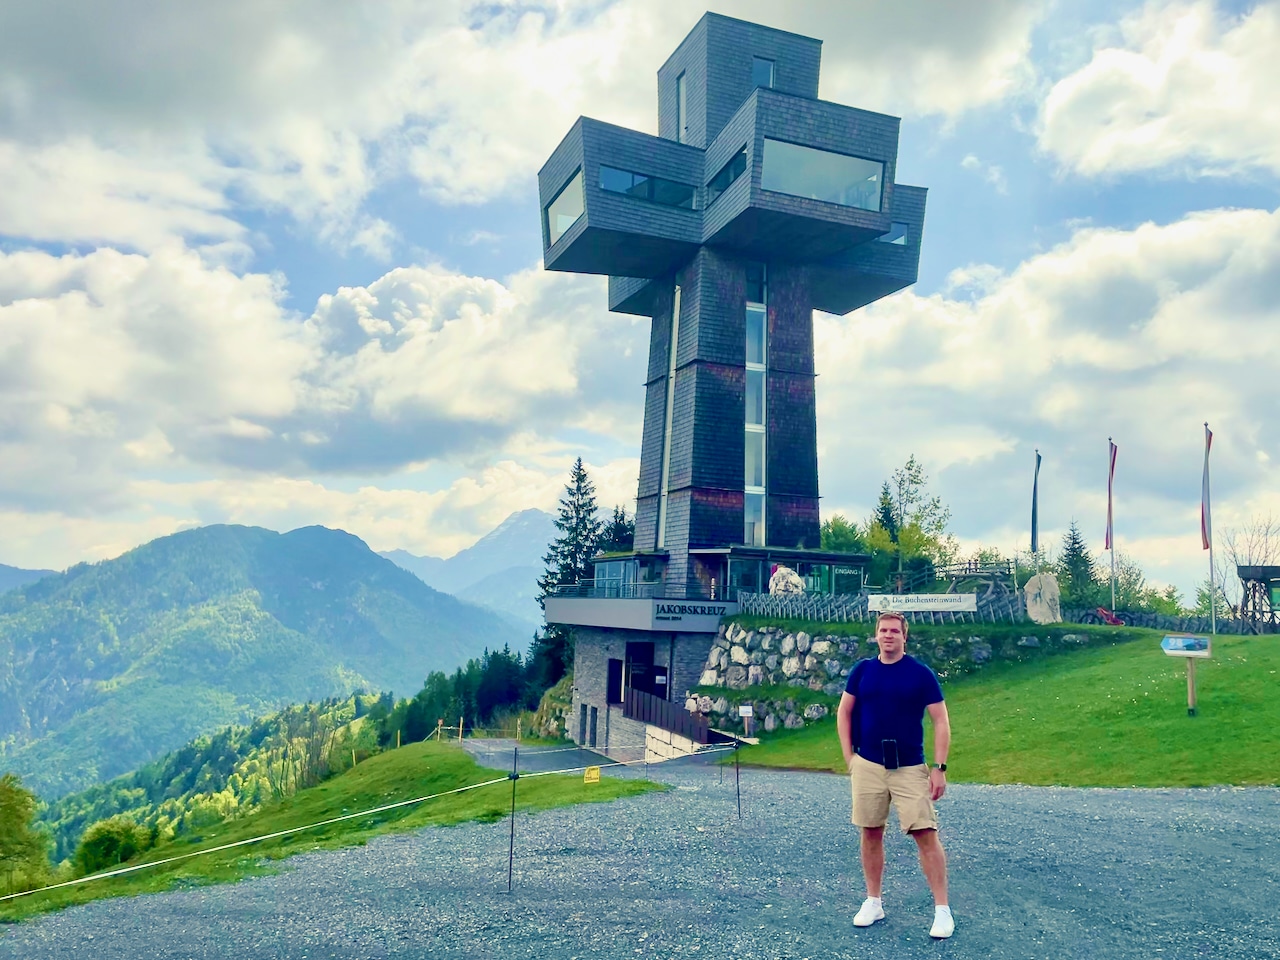 The Jakobskreuz is not only a lookout tower, but also a place of encounter, reflection and education. Bergbahnen Fieberbrunn Bergbahnen Fieberbrunn & PillerseeTal – my experience report